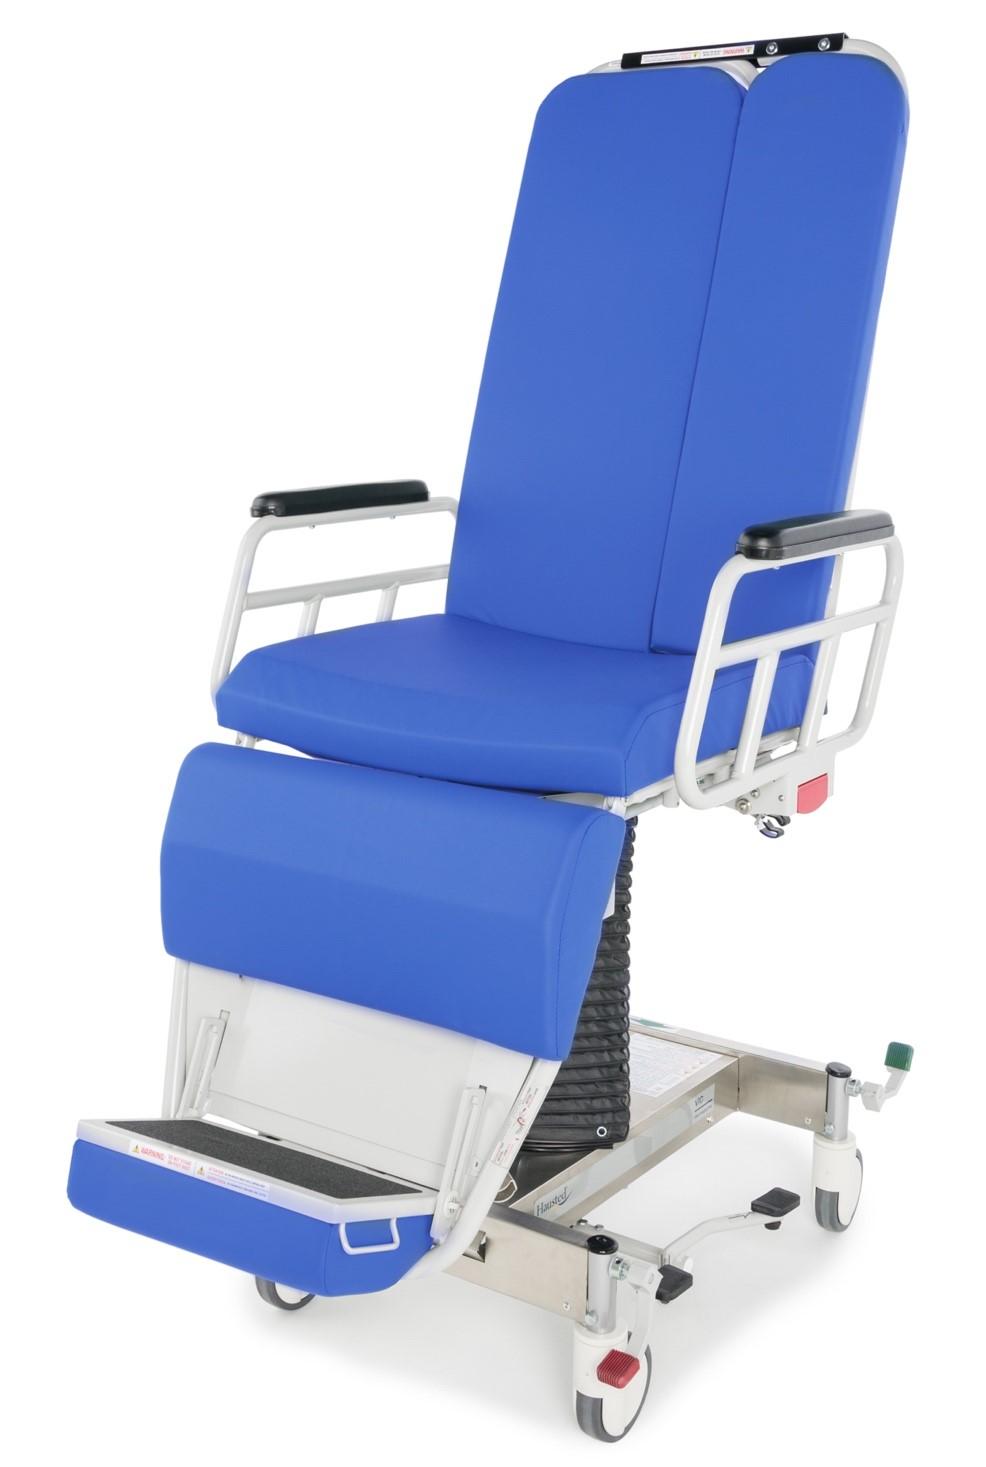 Video Imaging Chair (VIC)